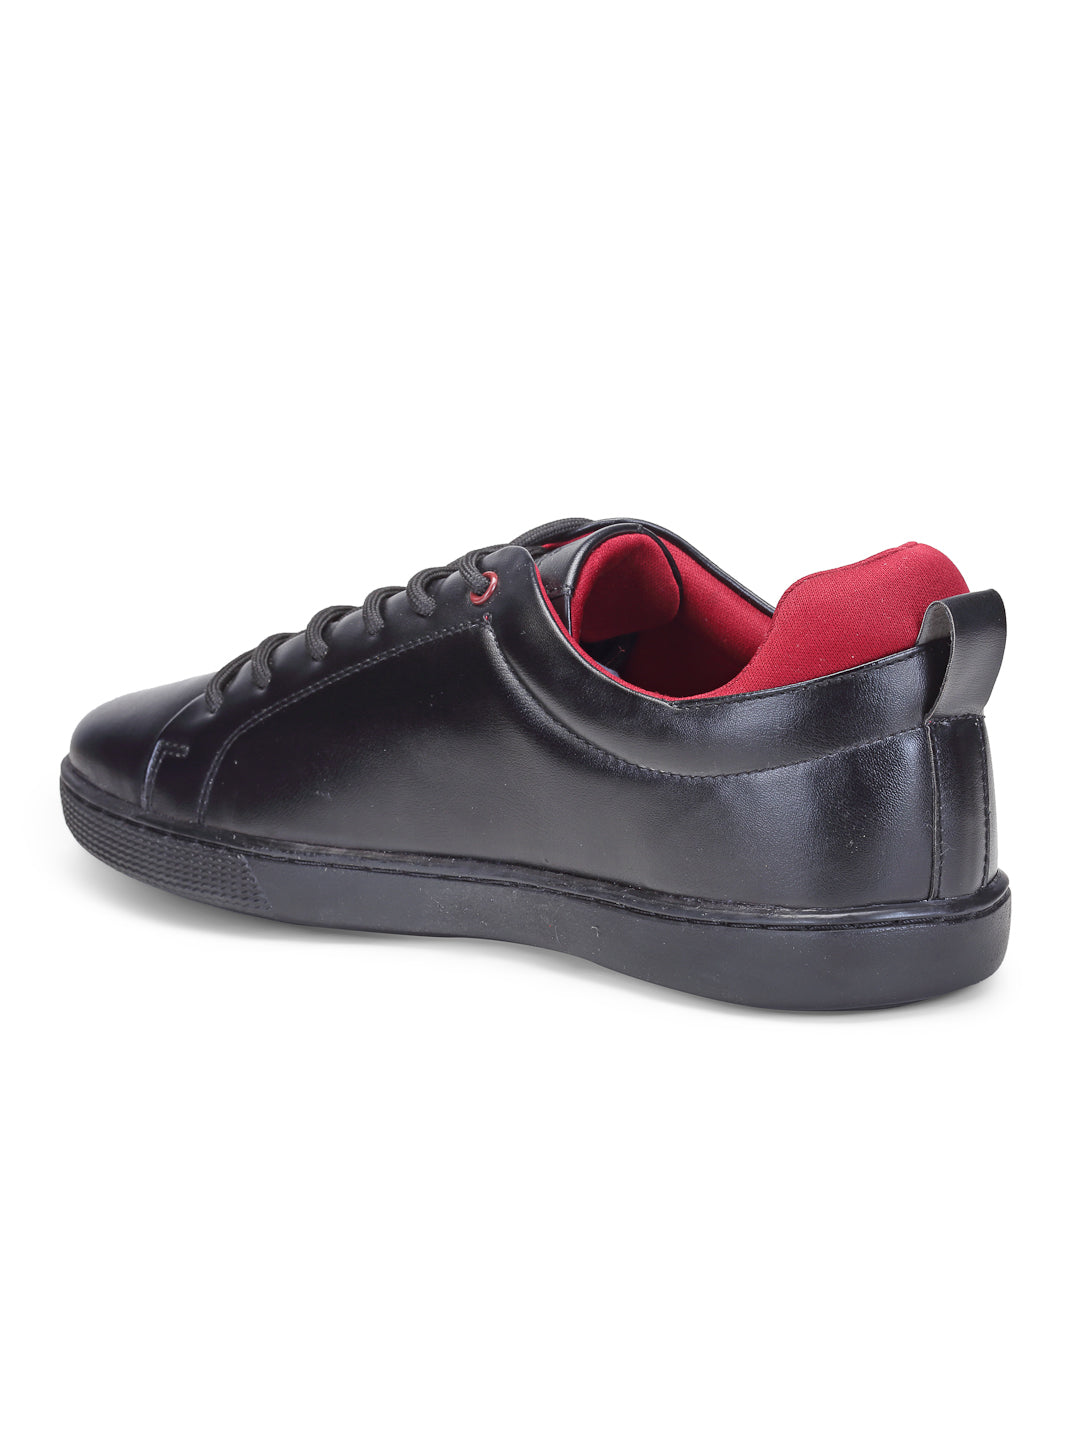 Black Solid Synthetic Leather & Comfort Foam Lace Up Sneakers For Men